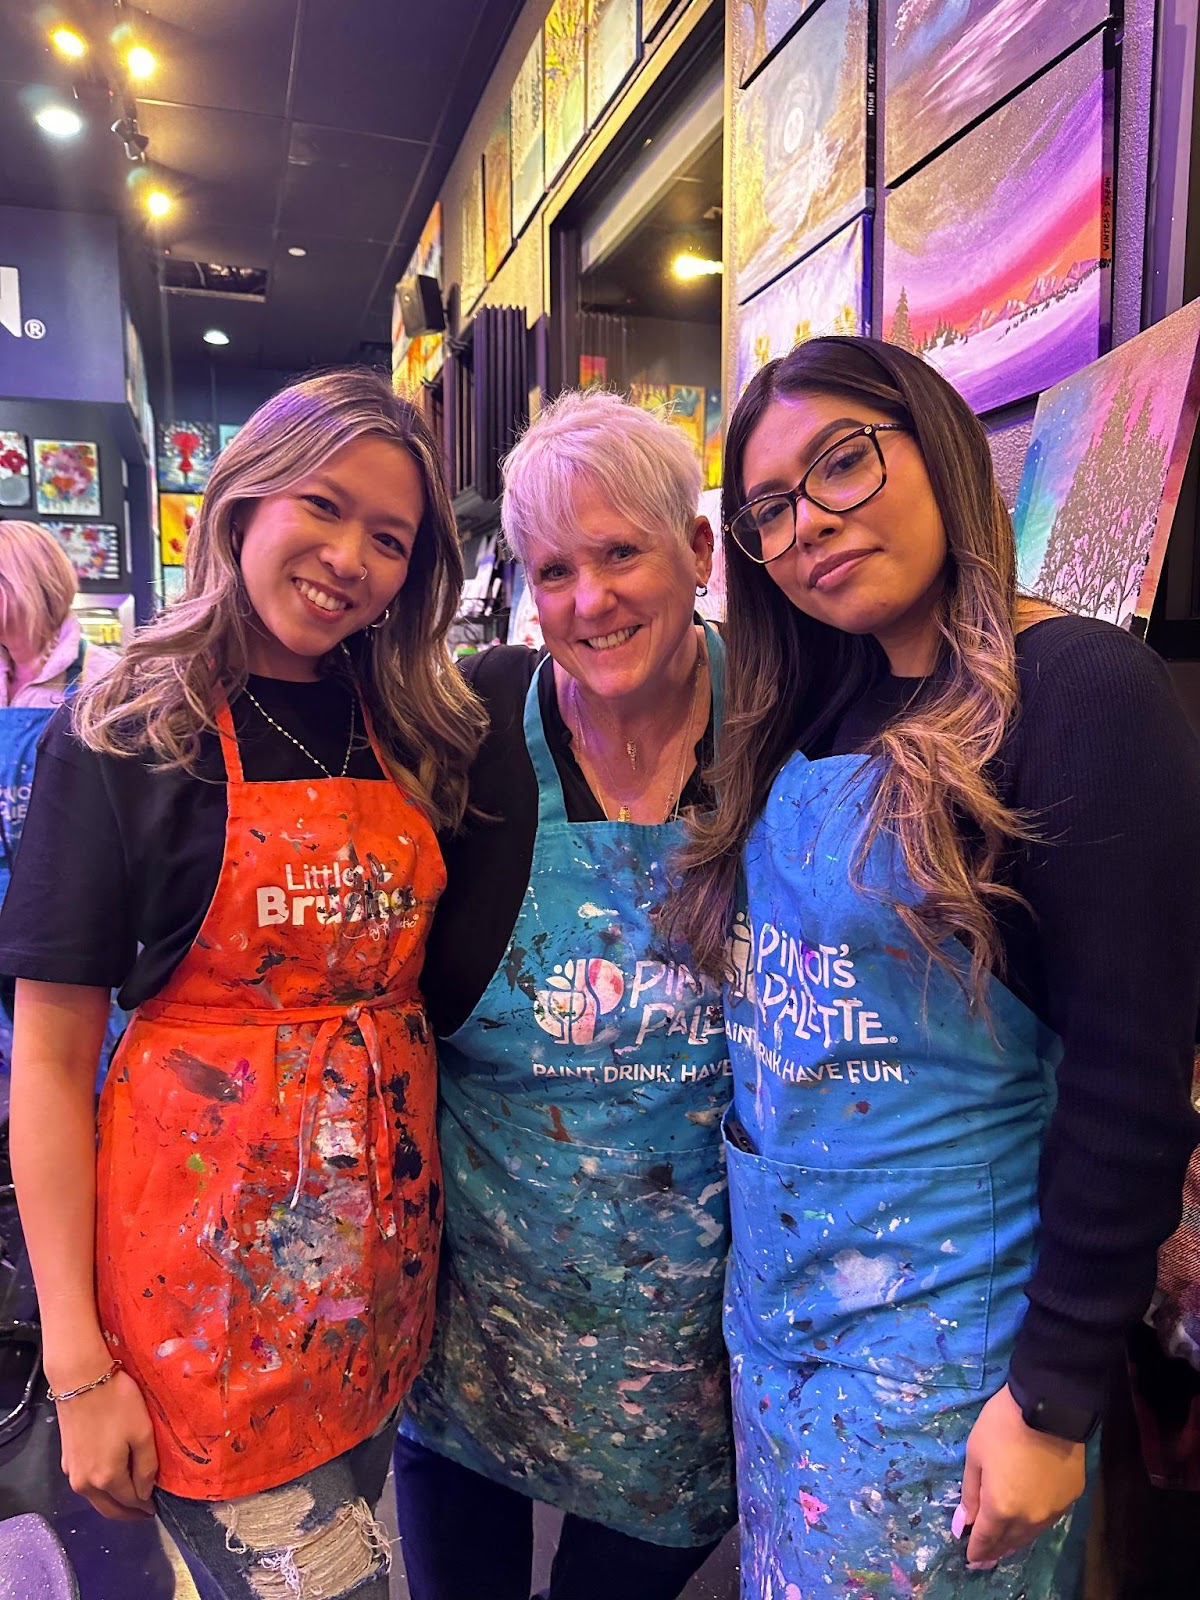 three women posed together with painting smocks on